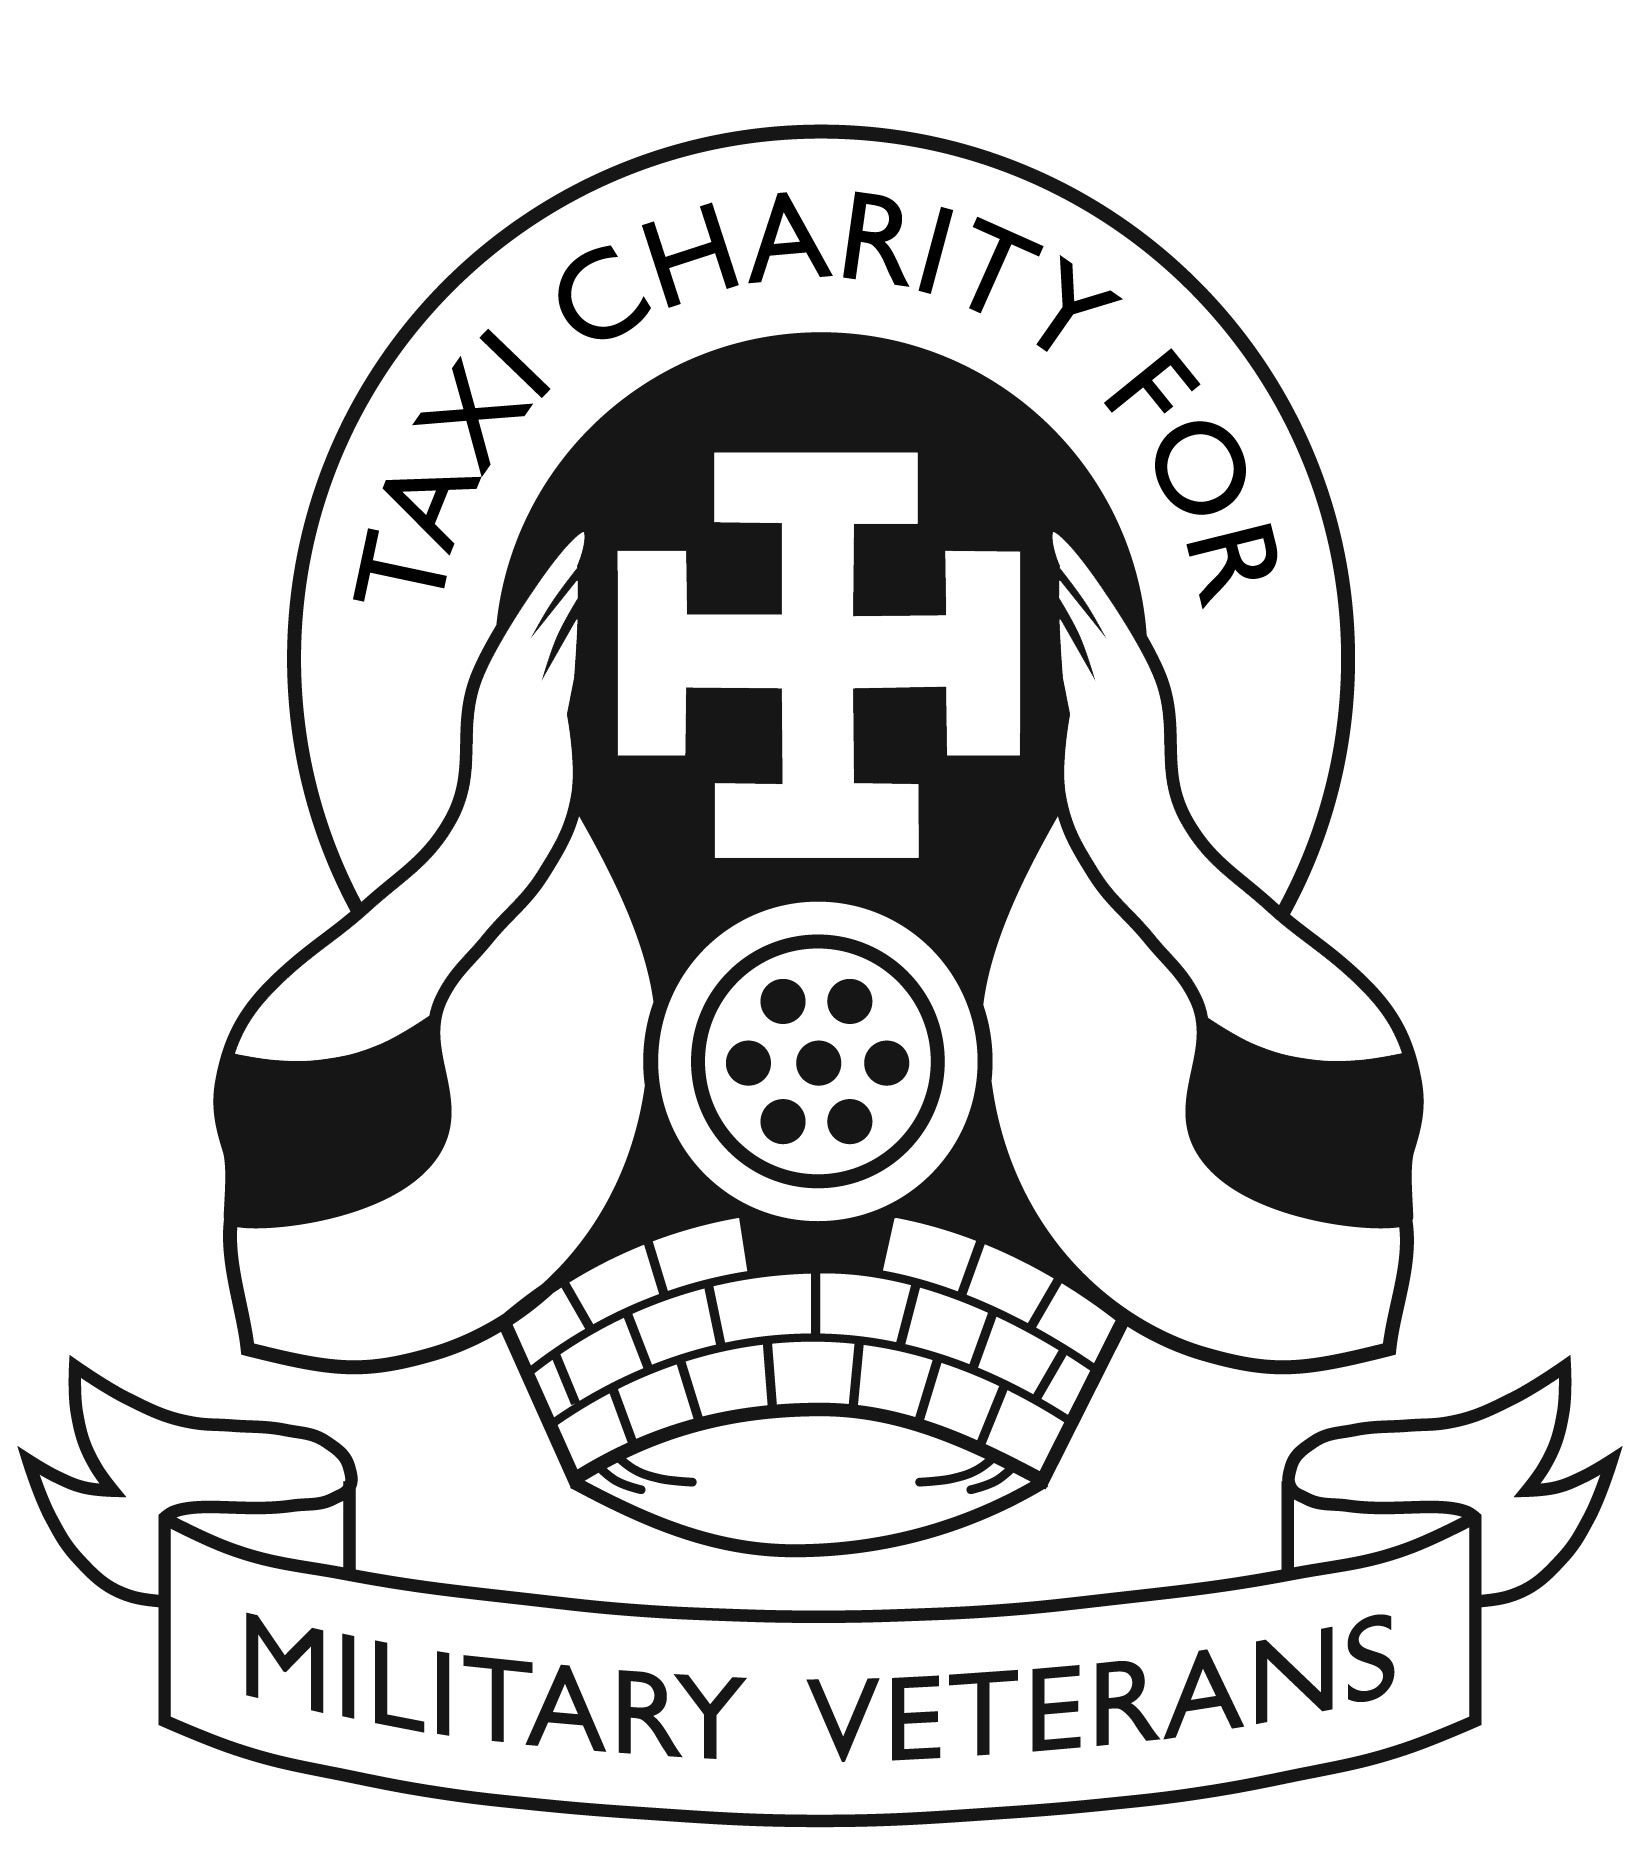 Taxi Charity for Military Veterans